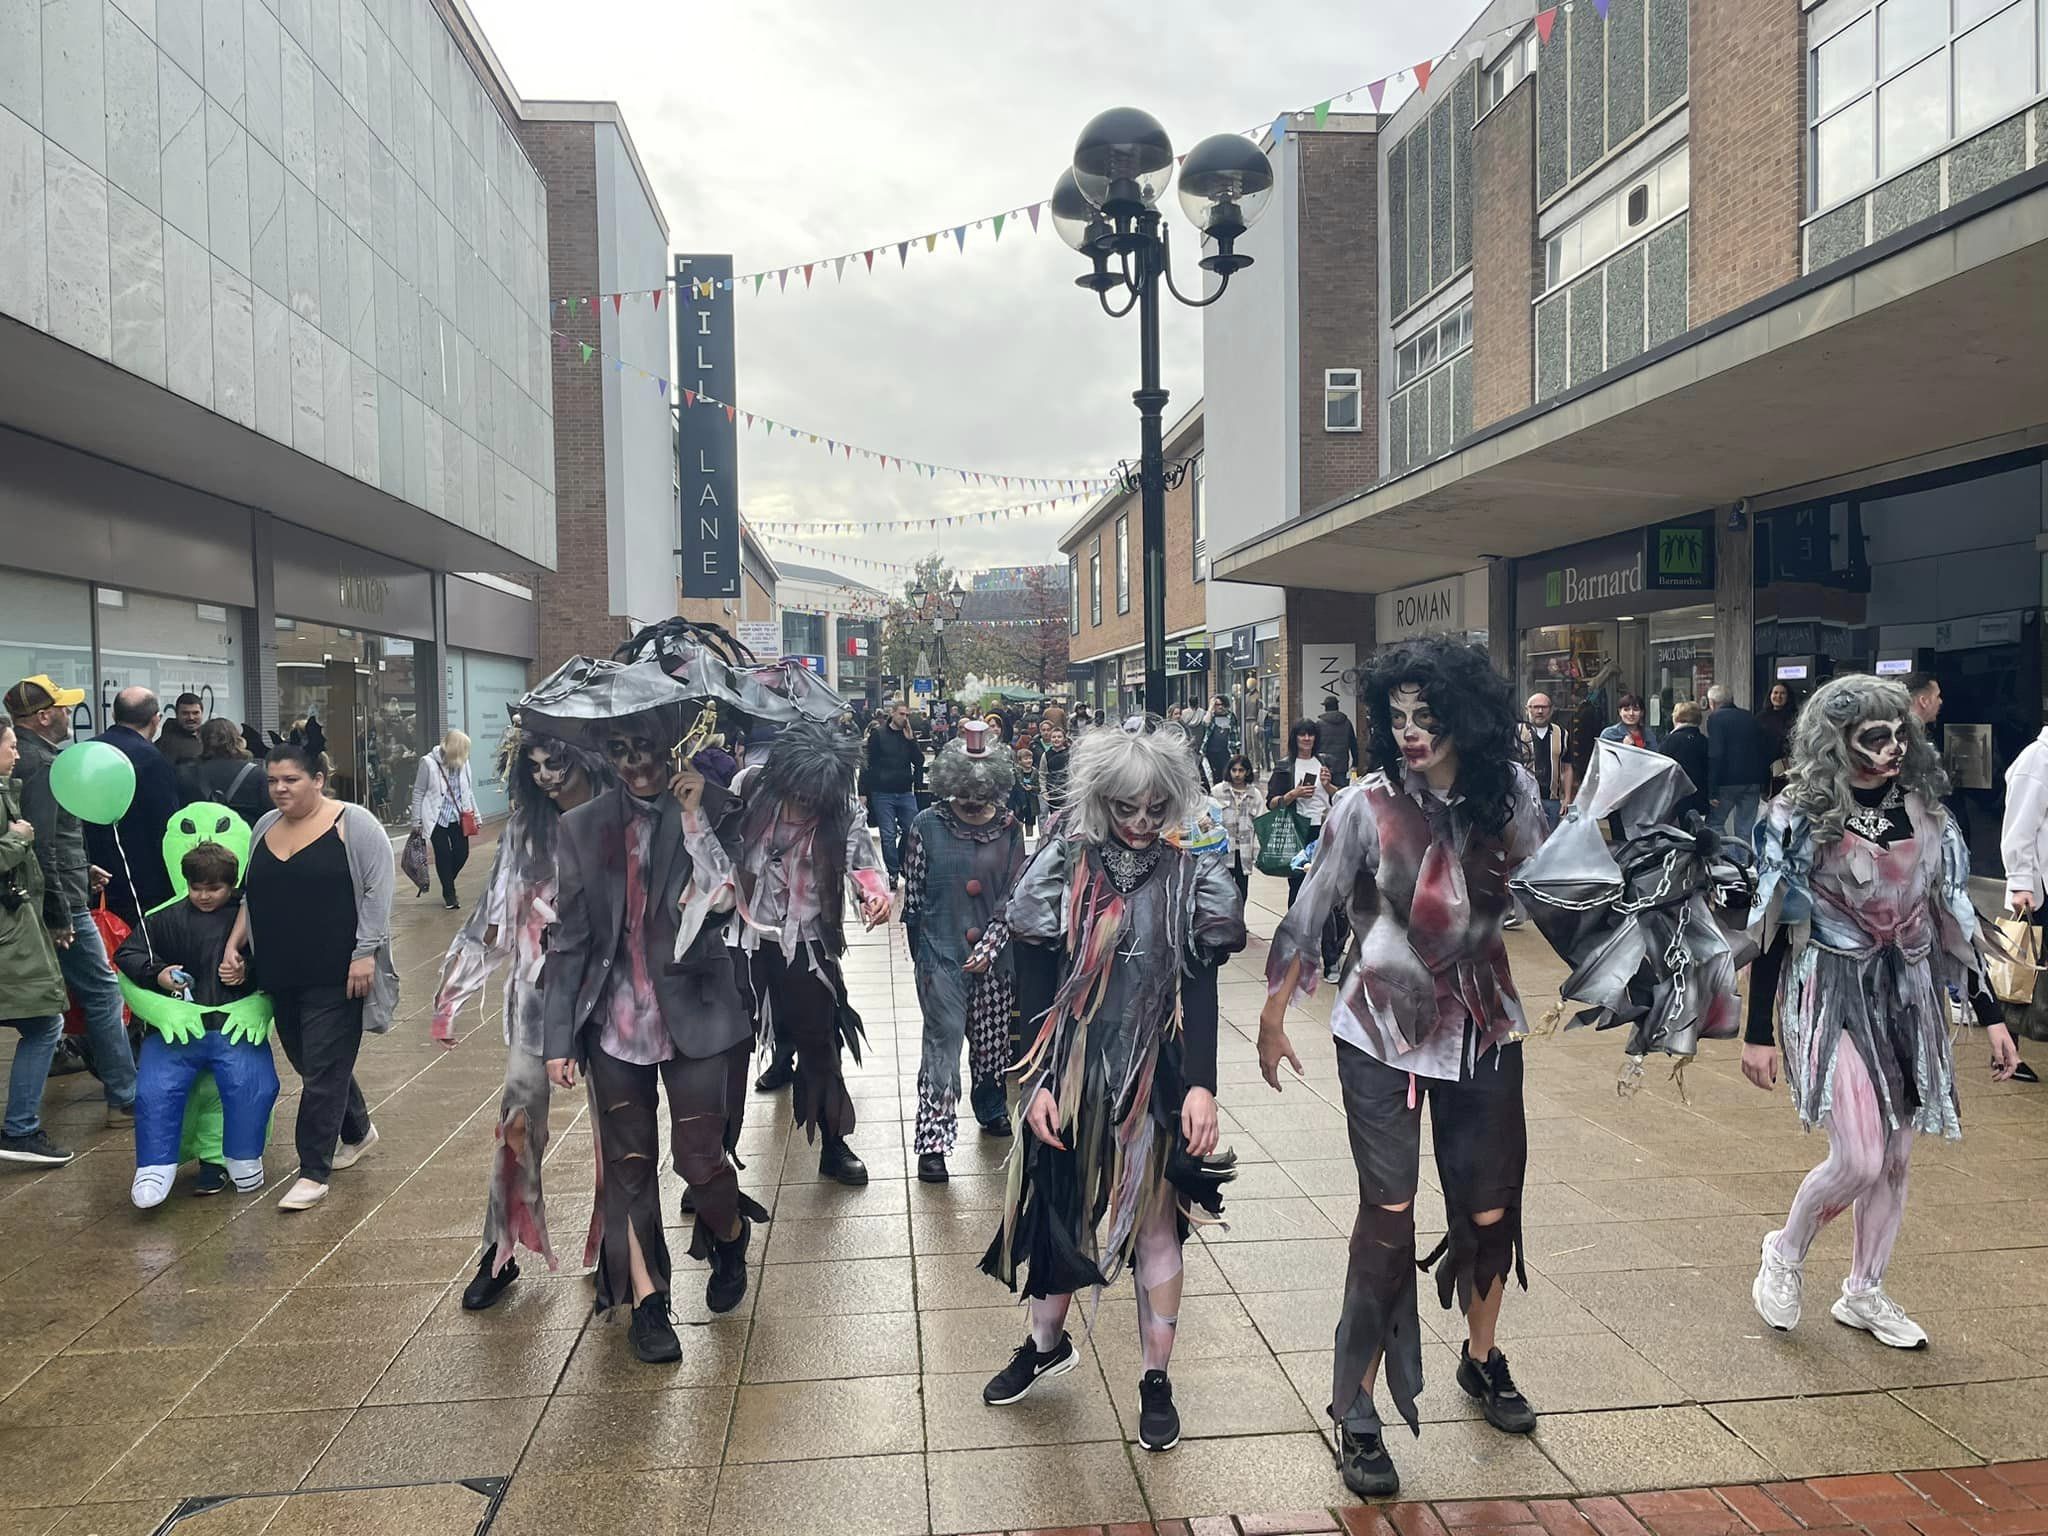 Solihull town centre to celebrate Halloween in style